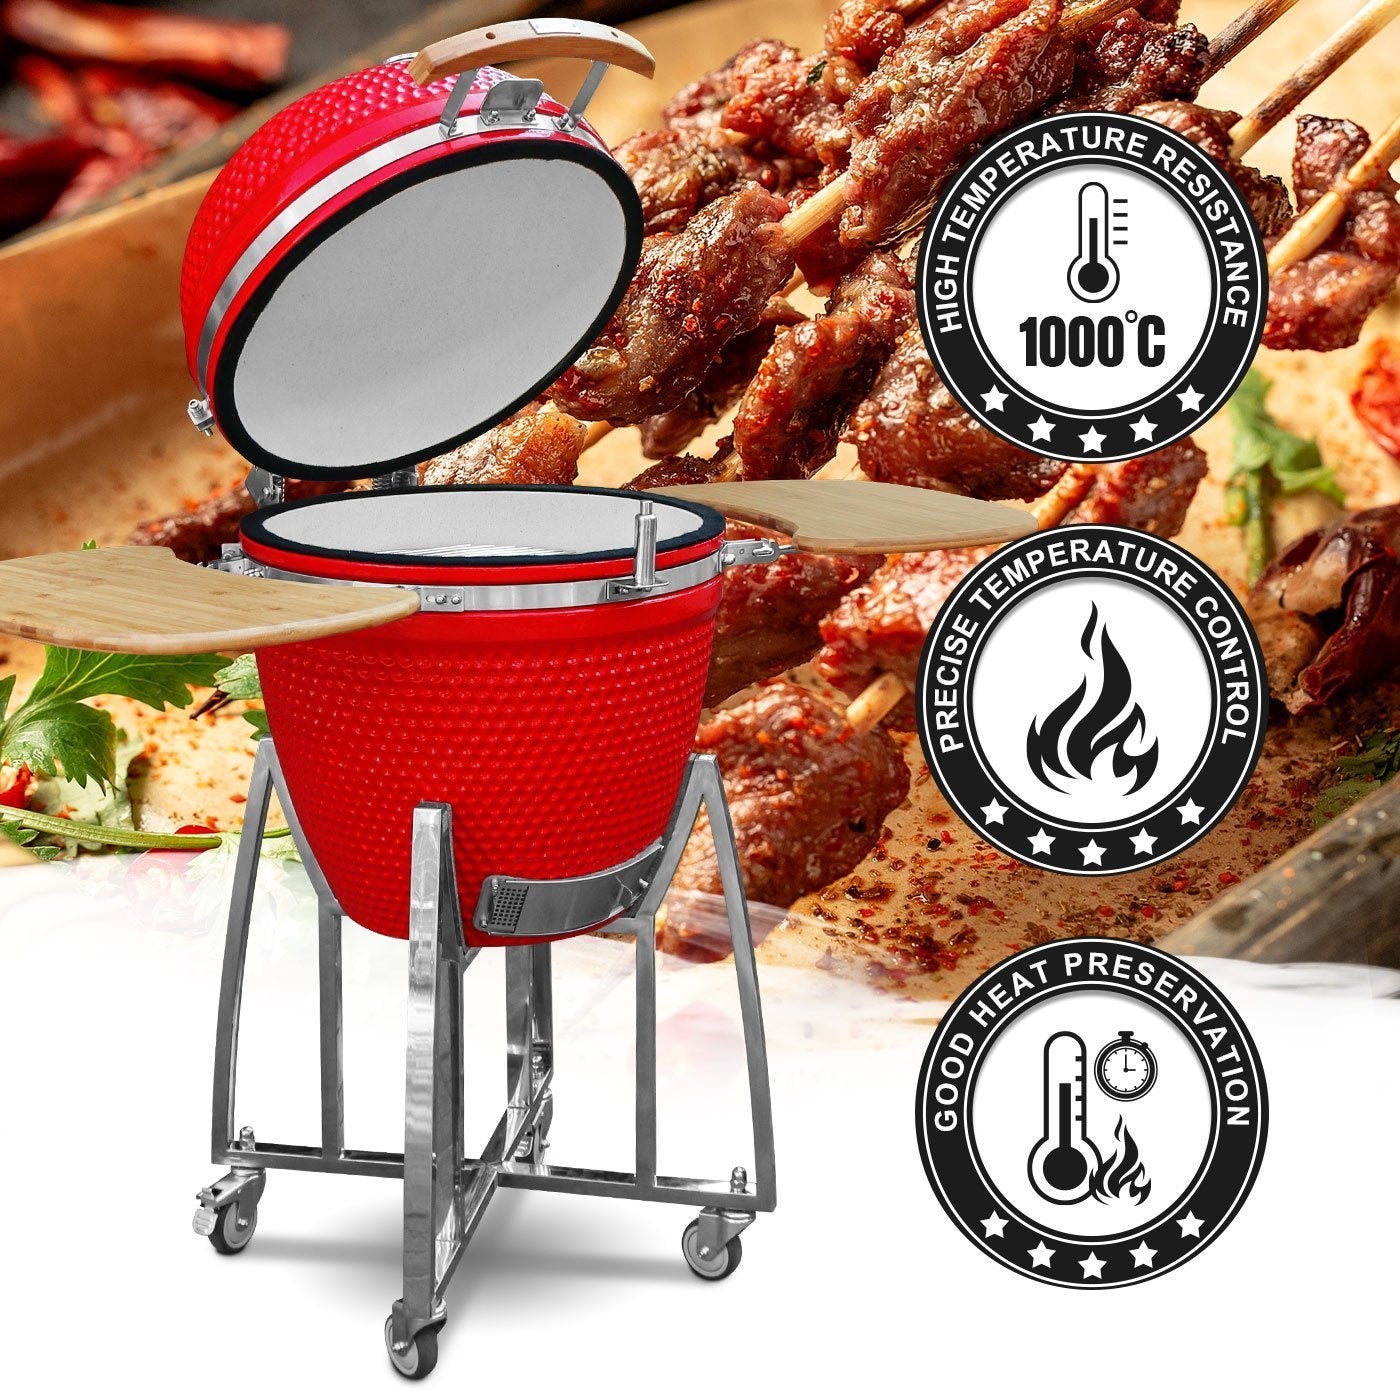 Ceramic 18″ Kamado BBQ Smoker Grill with Stand and Bamboo Sideboard - Colors: Red/Black/Orange/Green